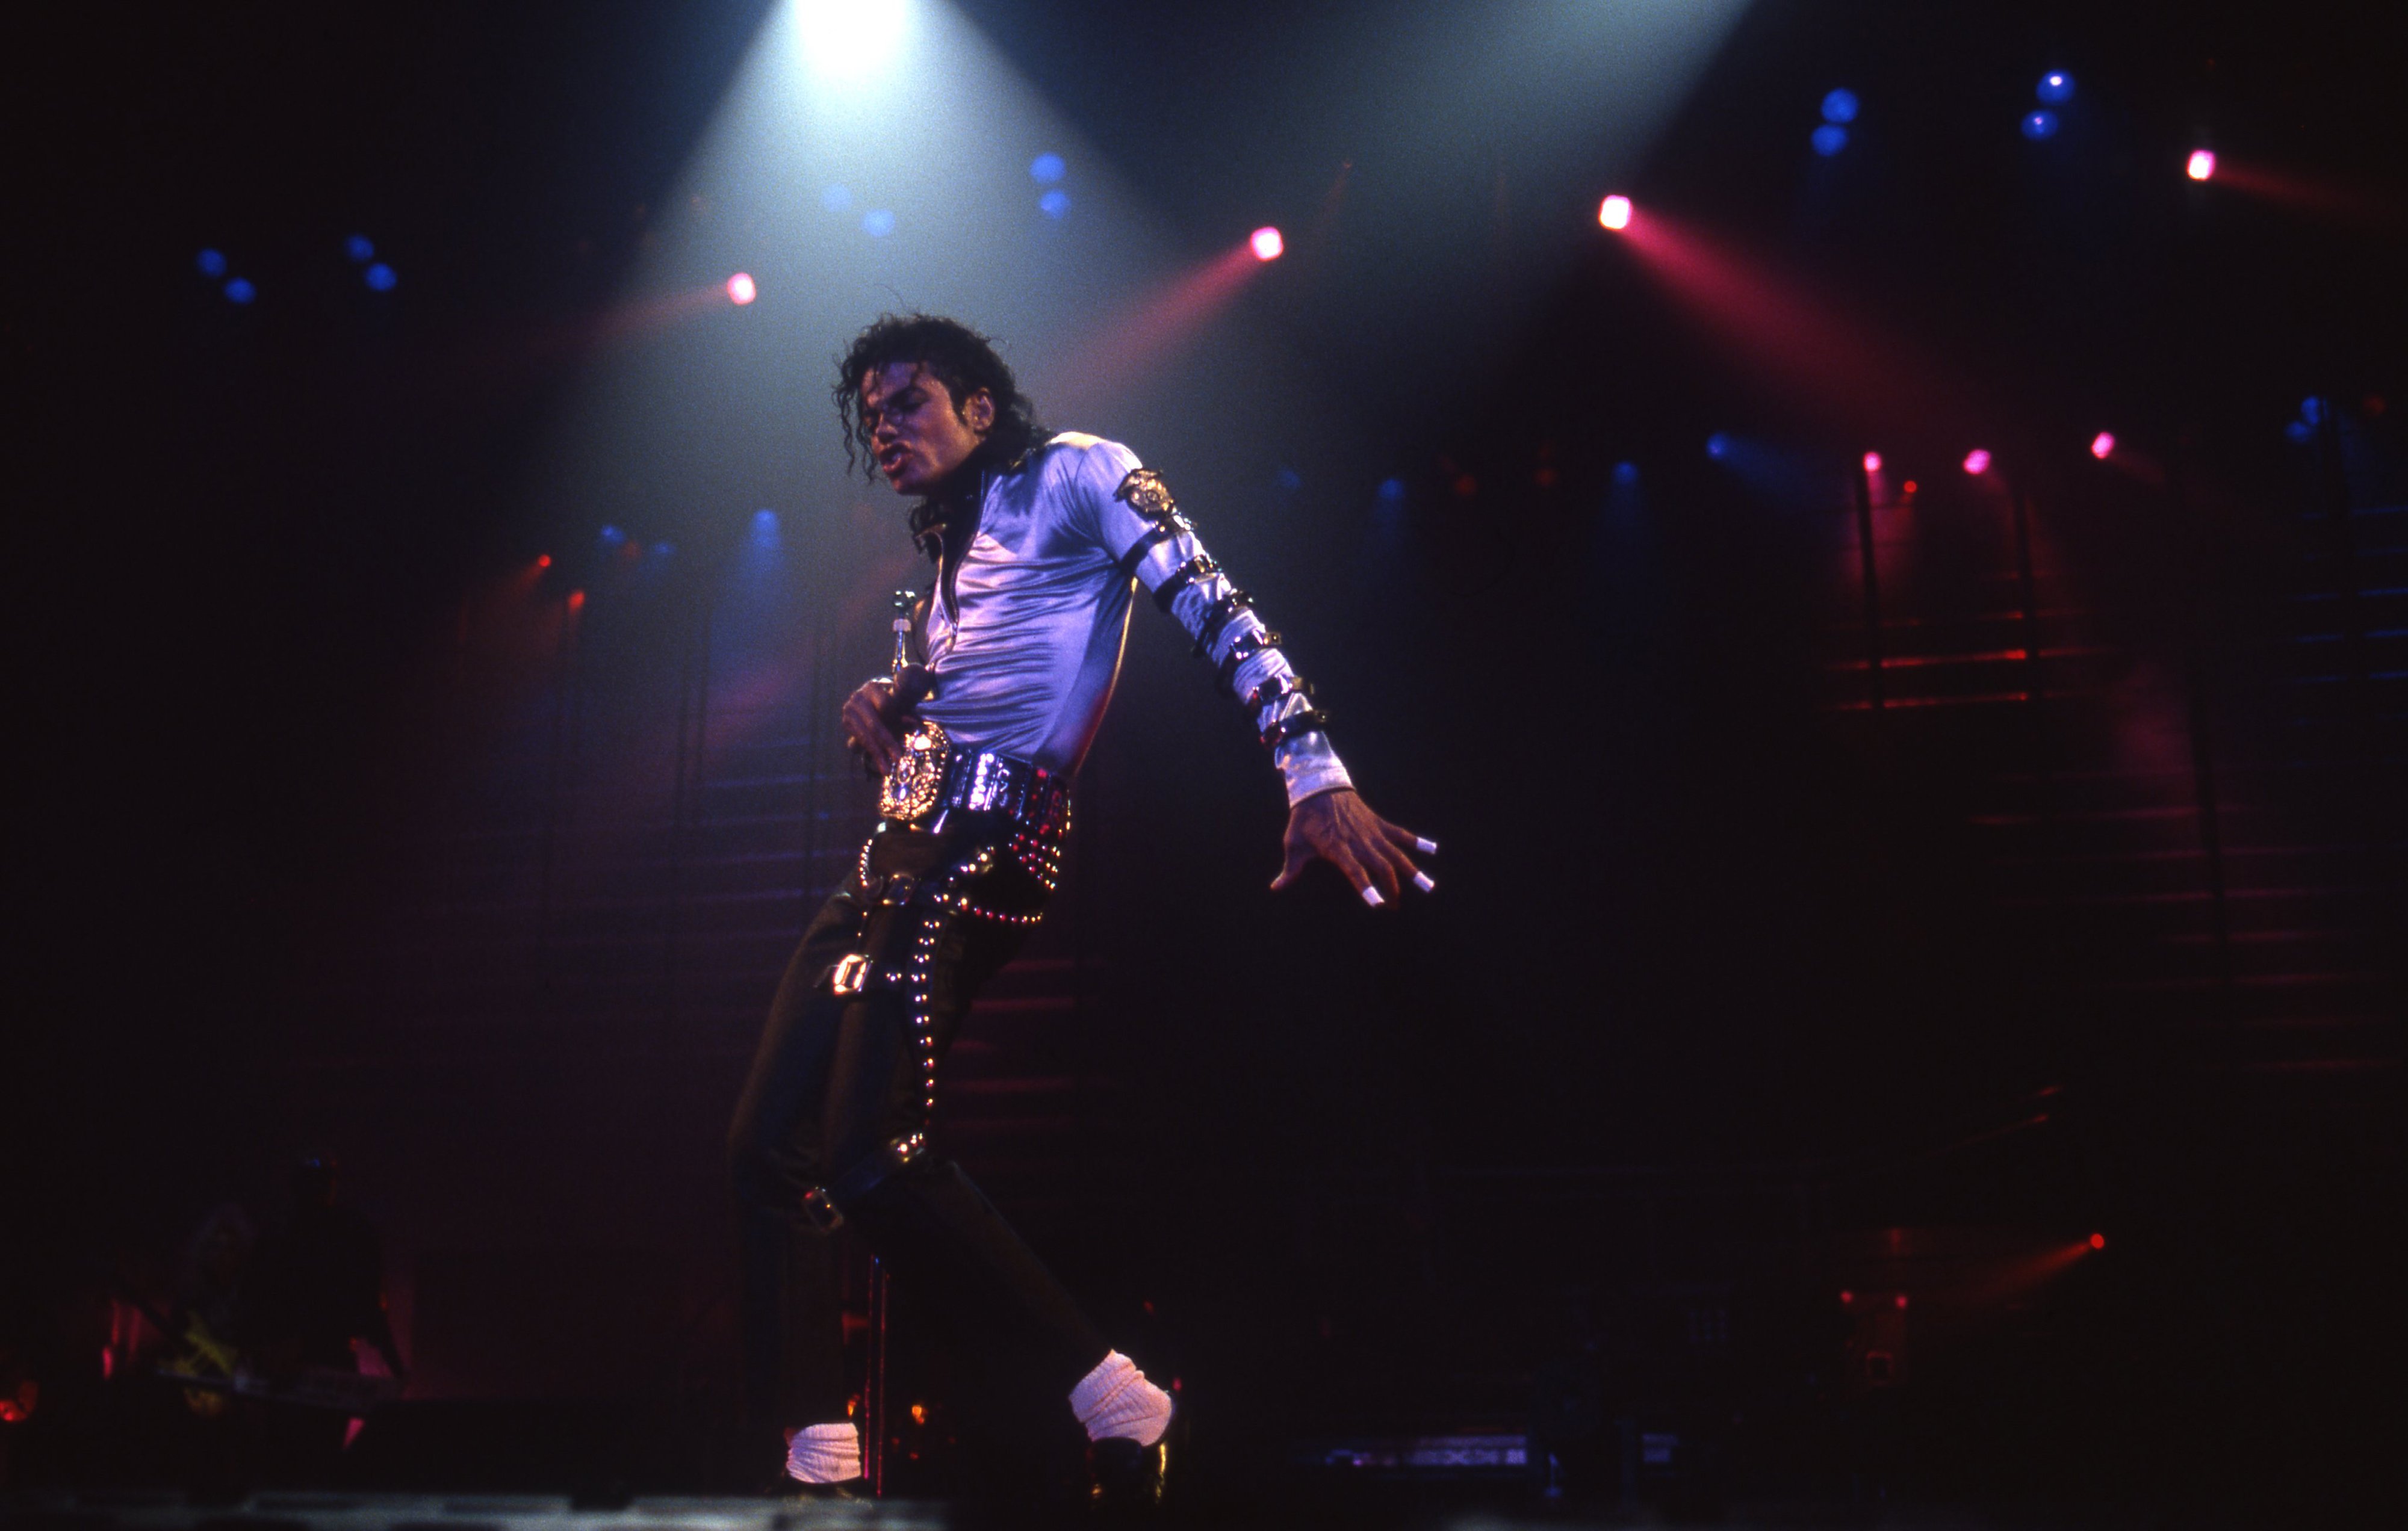 Jan 18, 1989 Michael Jackson performs live at LA Sports Arena. | Photo: GettyImages